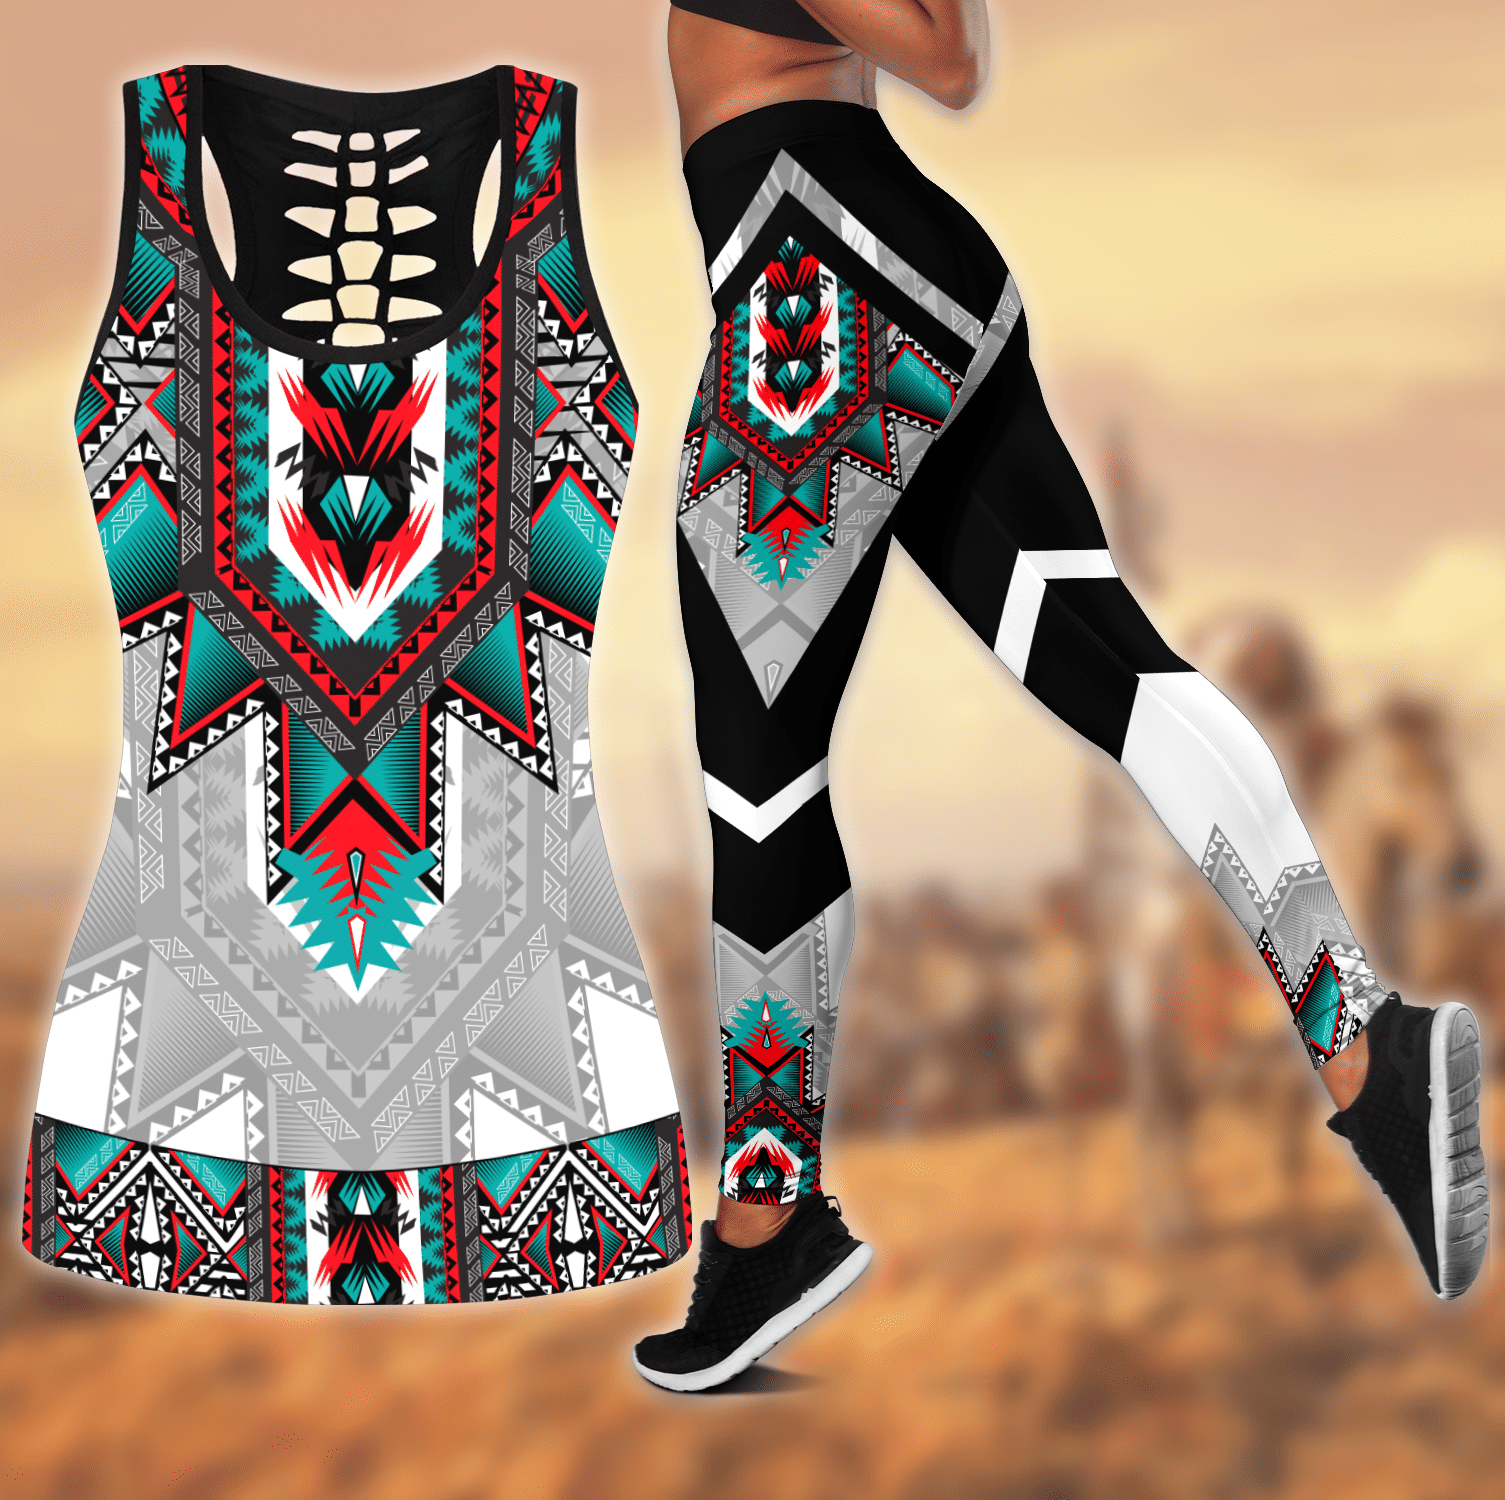 brocade-patterns-native-american-all-over-printed-leggings-and-hollow-tank-am-style-design